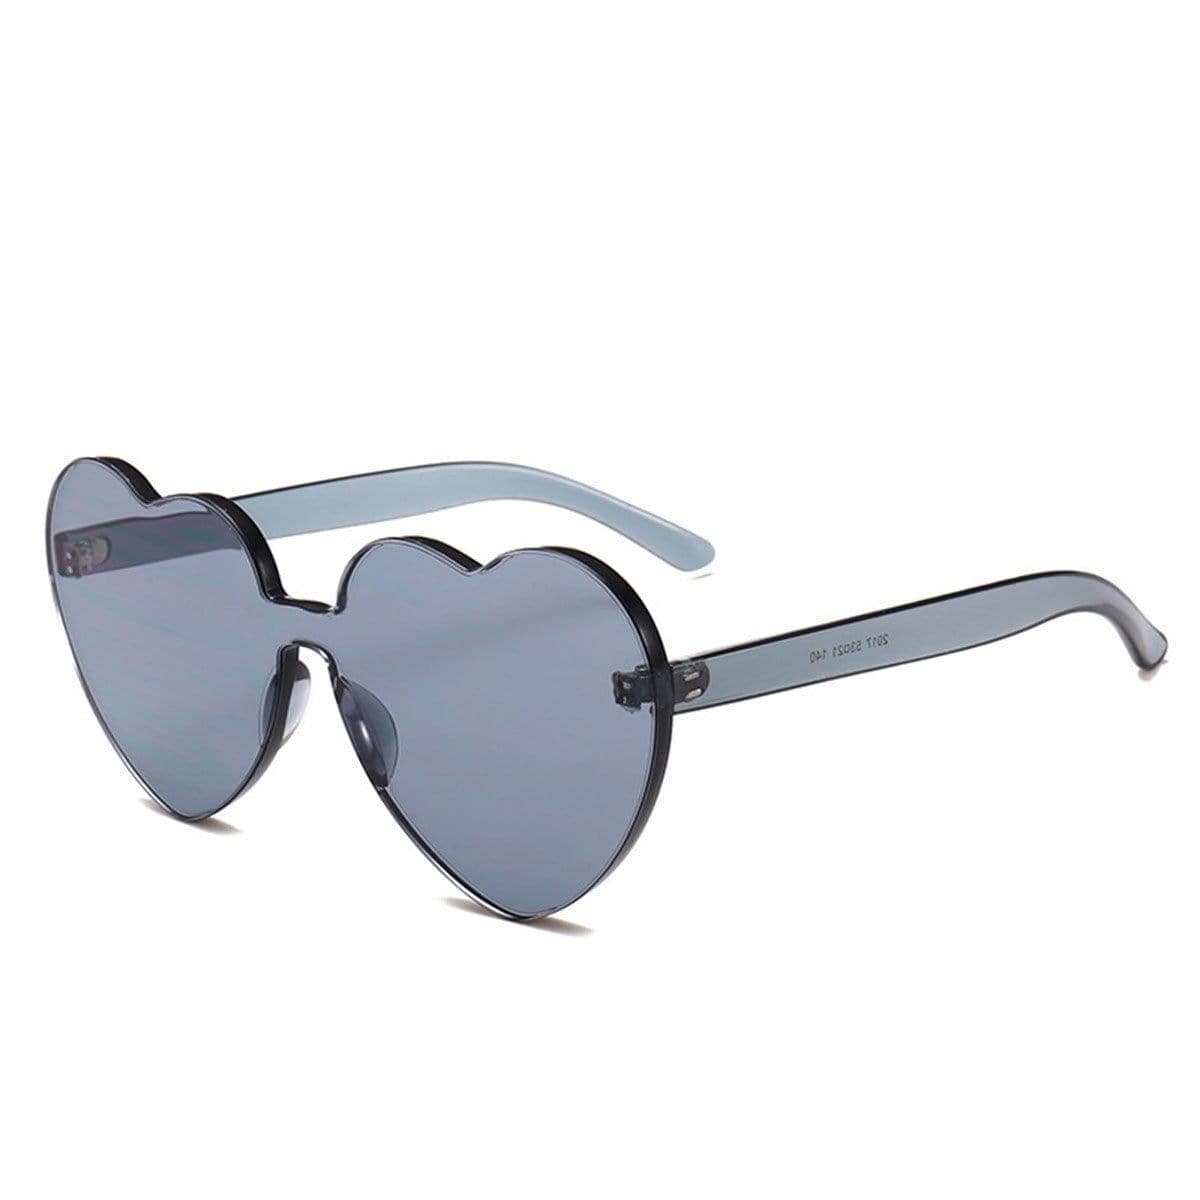 Buy Costume Accessories Black Fashion Shaped Sunglasses for adults sold at Party Expert